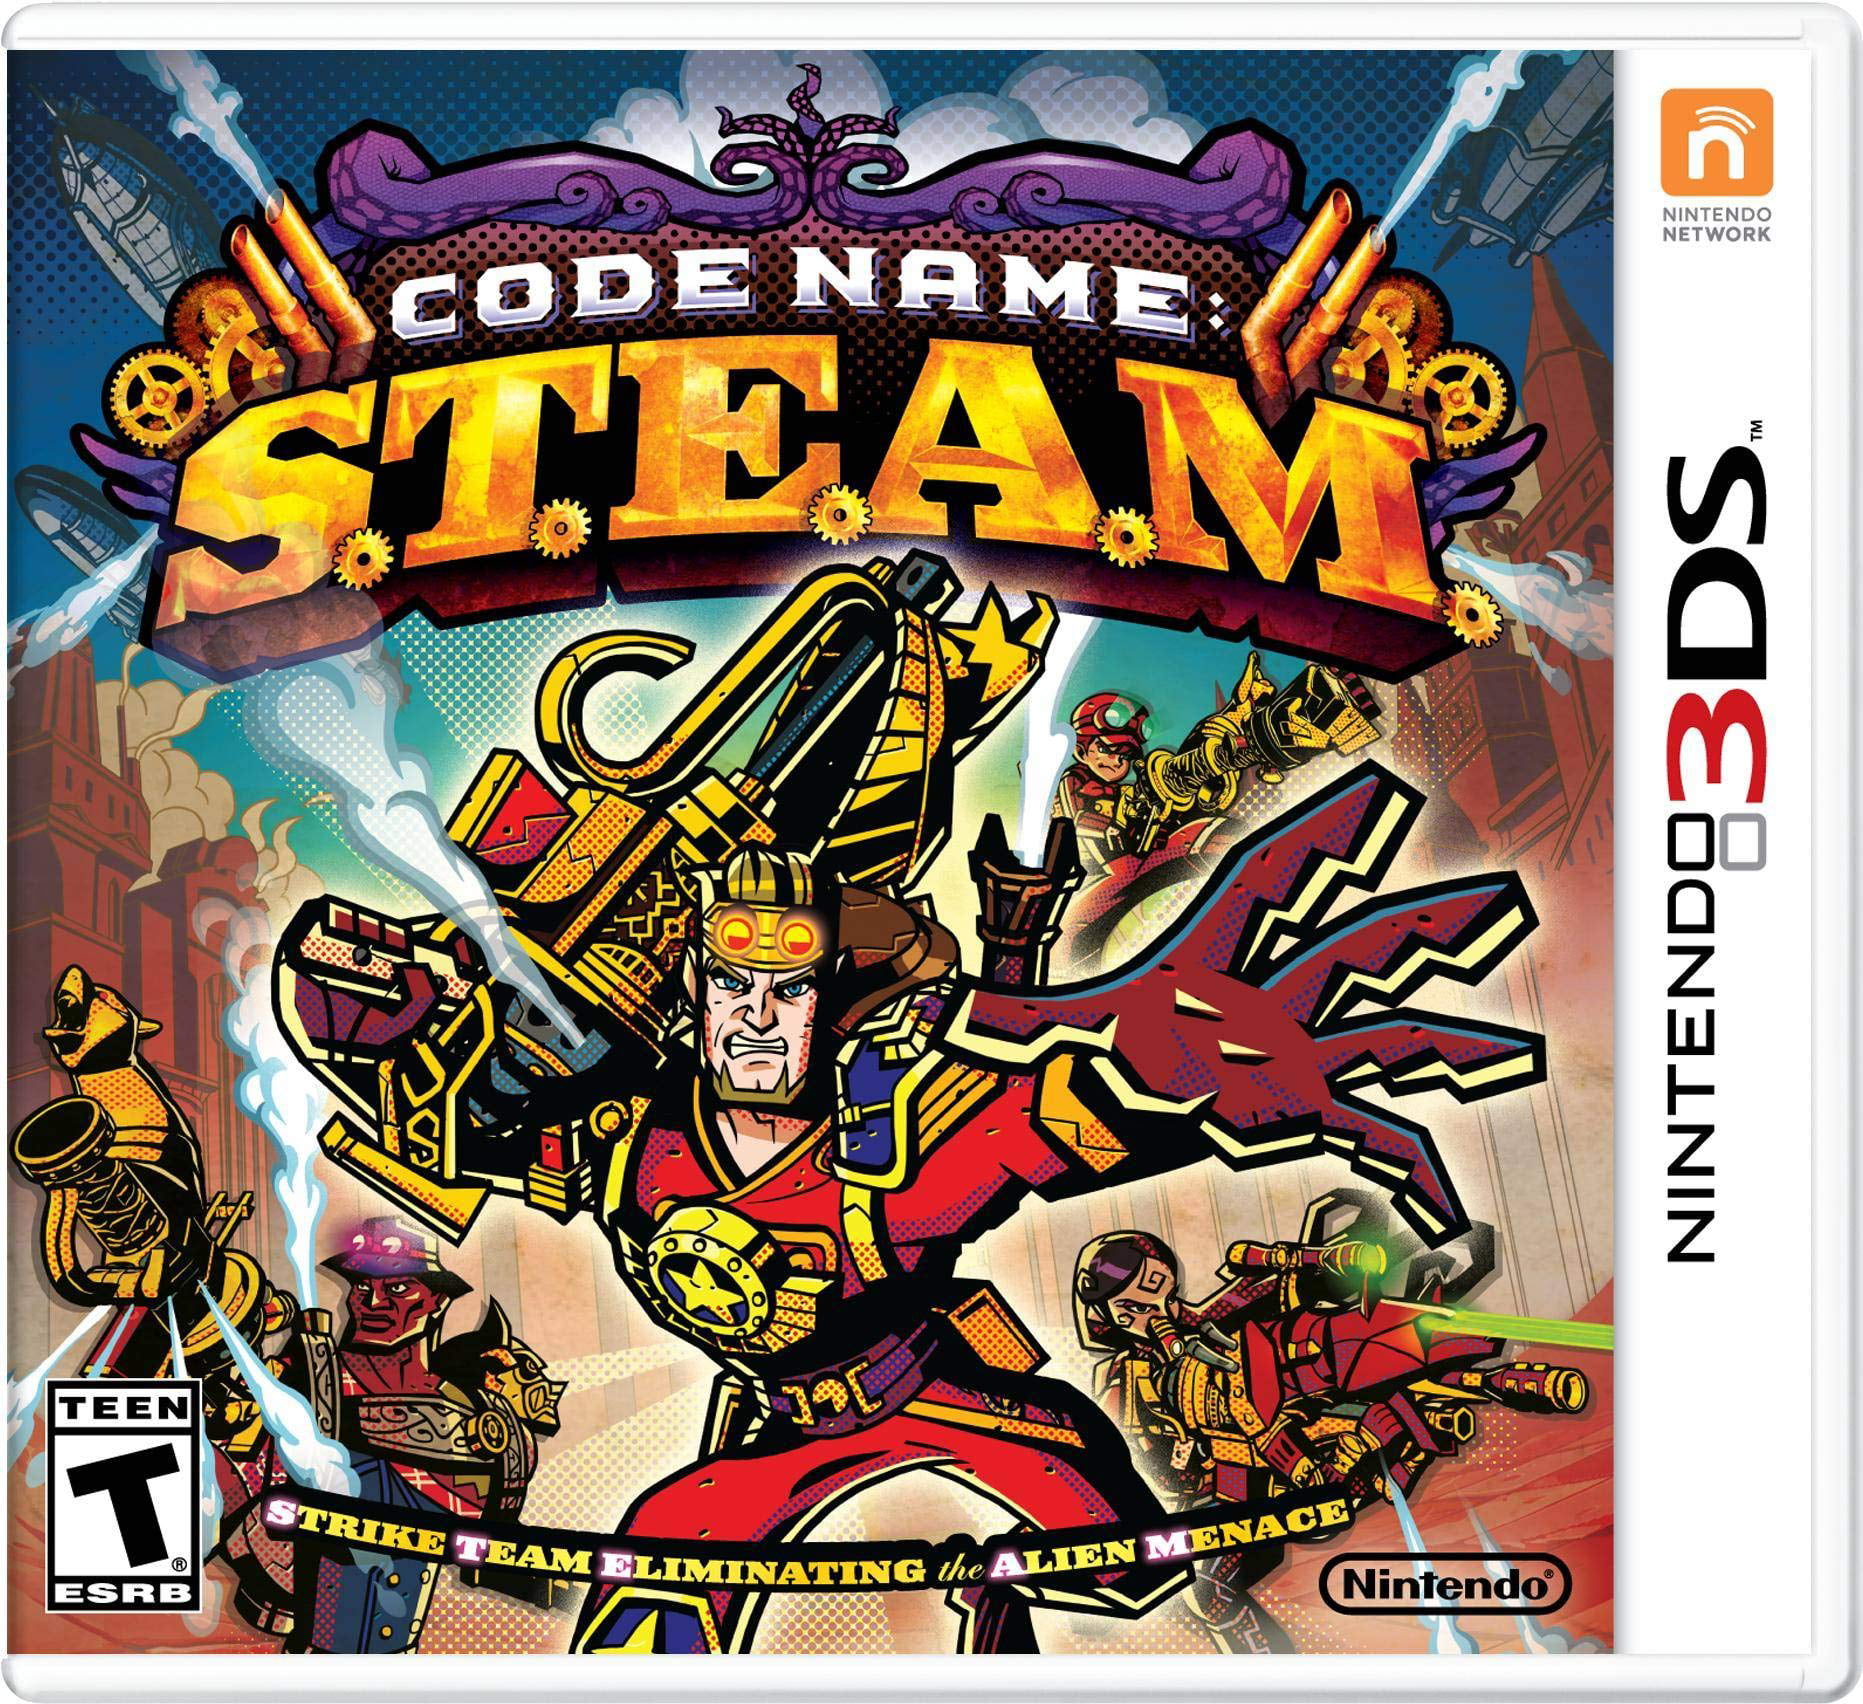 3DS - Code Name: S.T.E.A.M. - Chicken Gun - The Models Resource